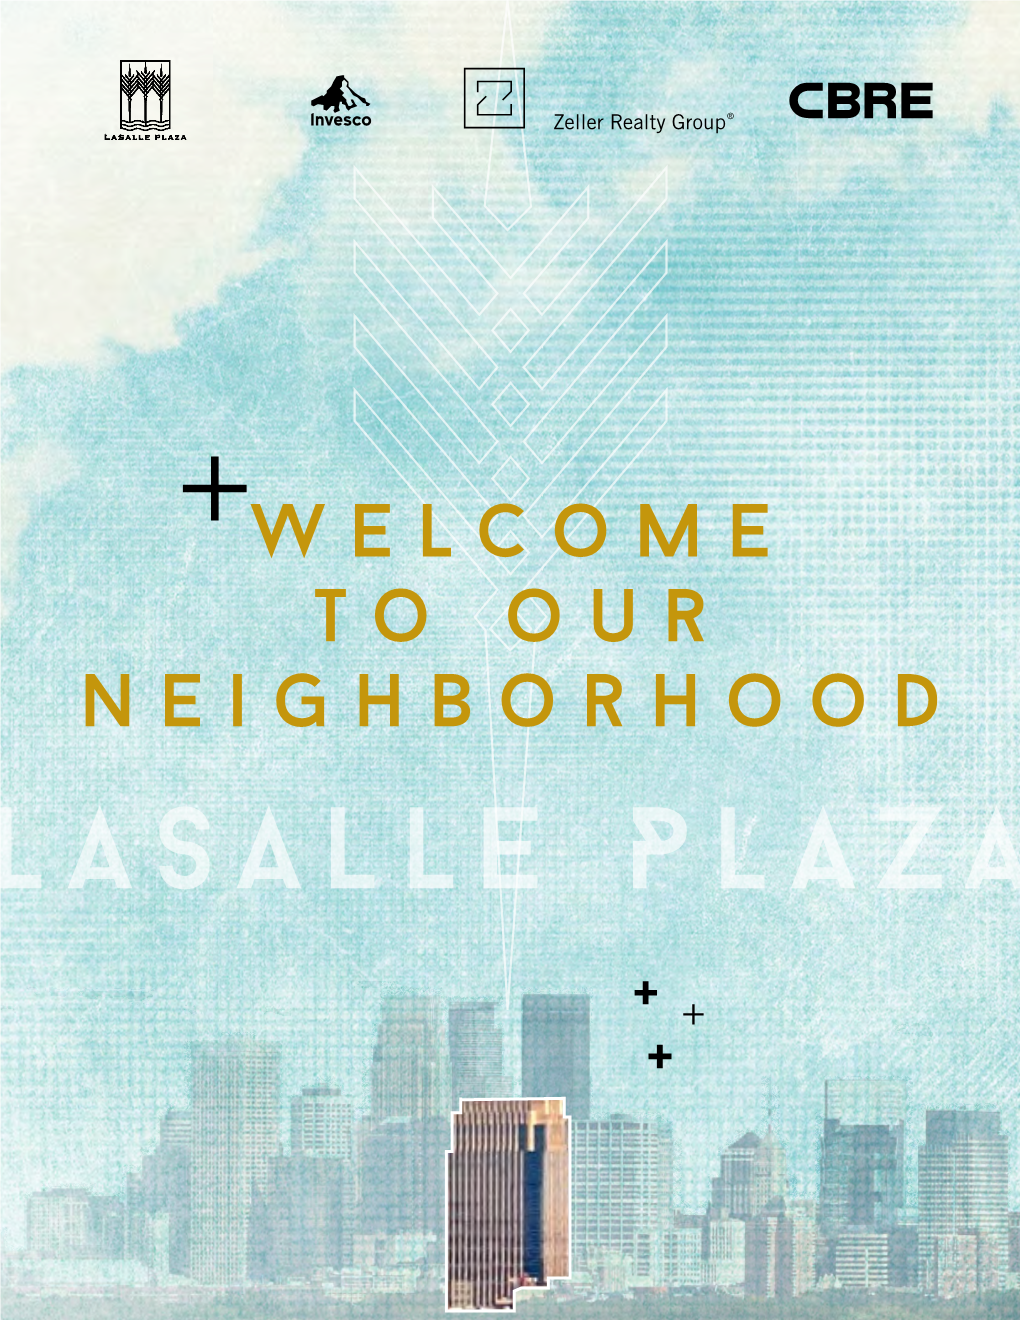 Our Neighborhood Lasalle Plaza Iconic, CLASS a DOWNTOWN TOWER